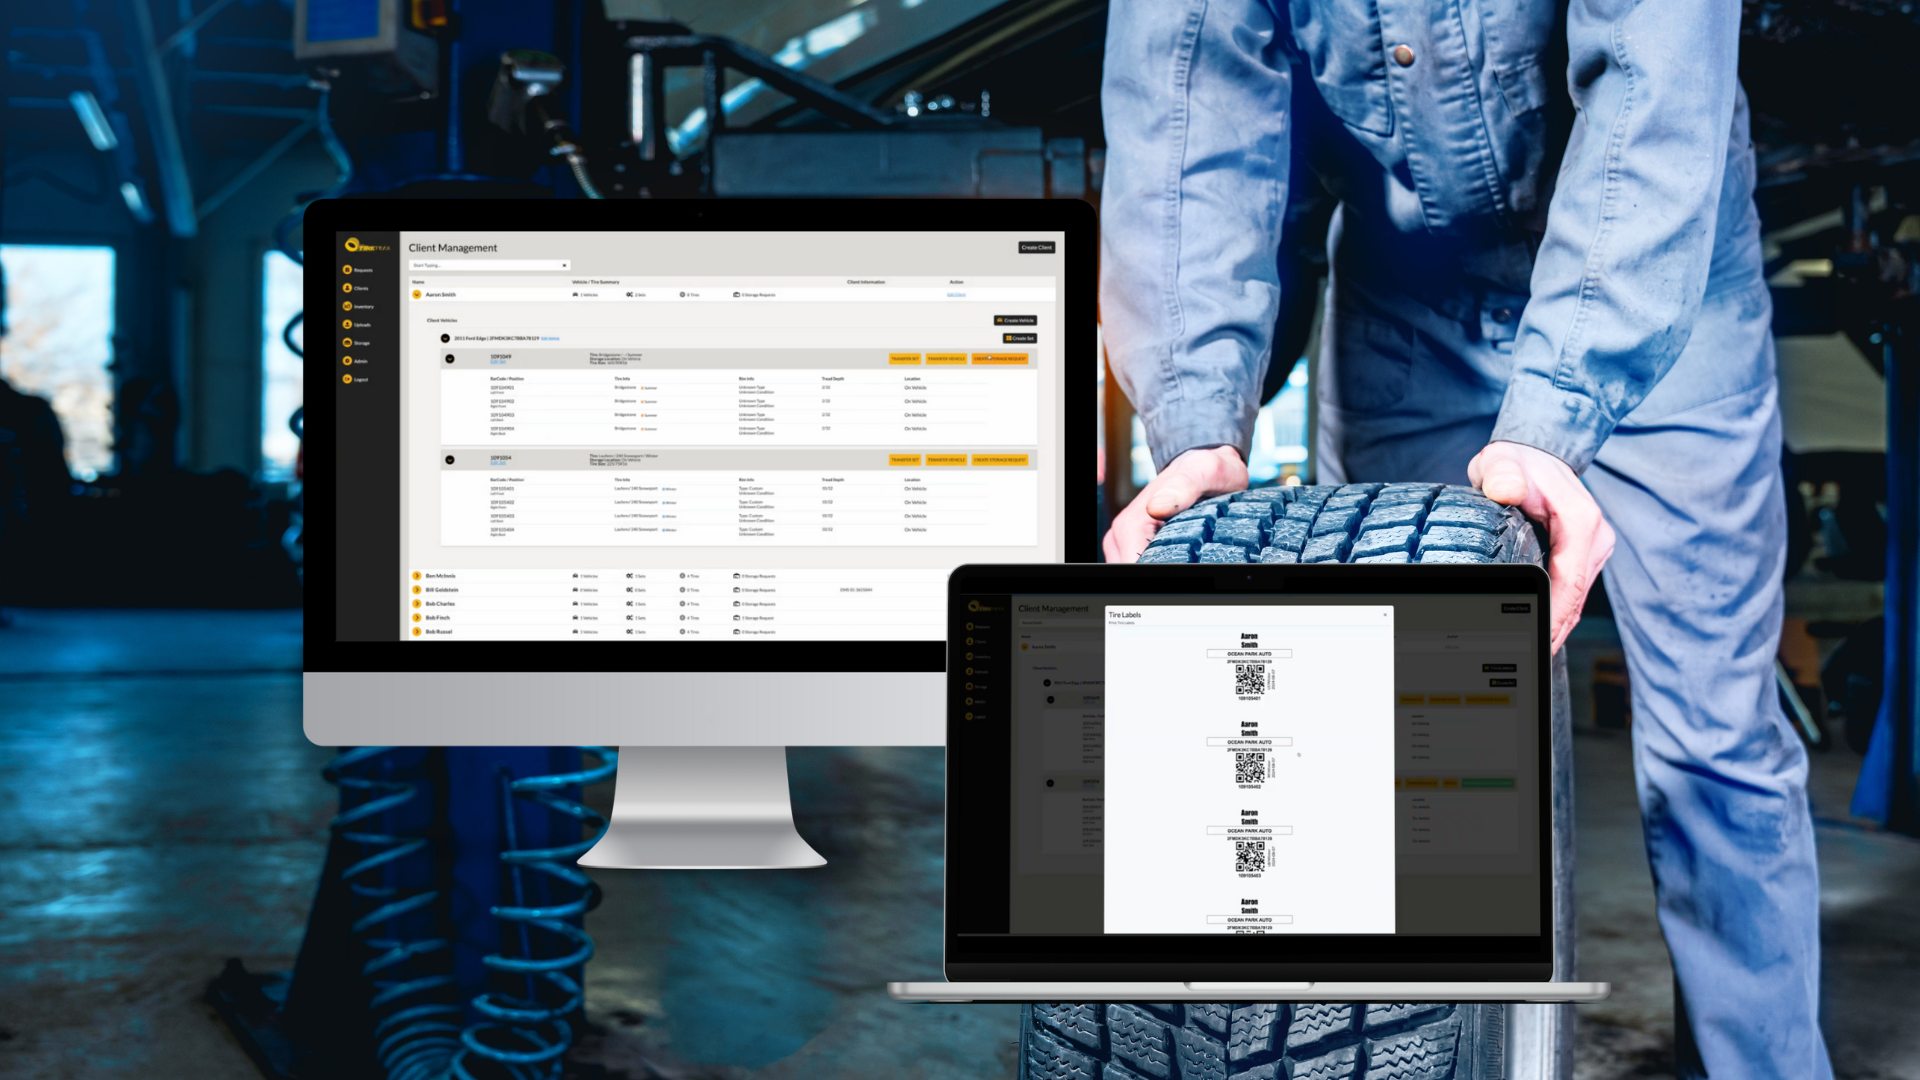 Tire Trax Dealership App - an example of custom software solutions